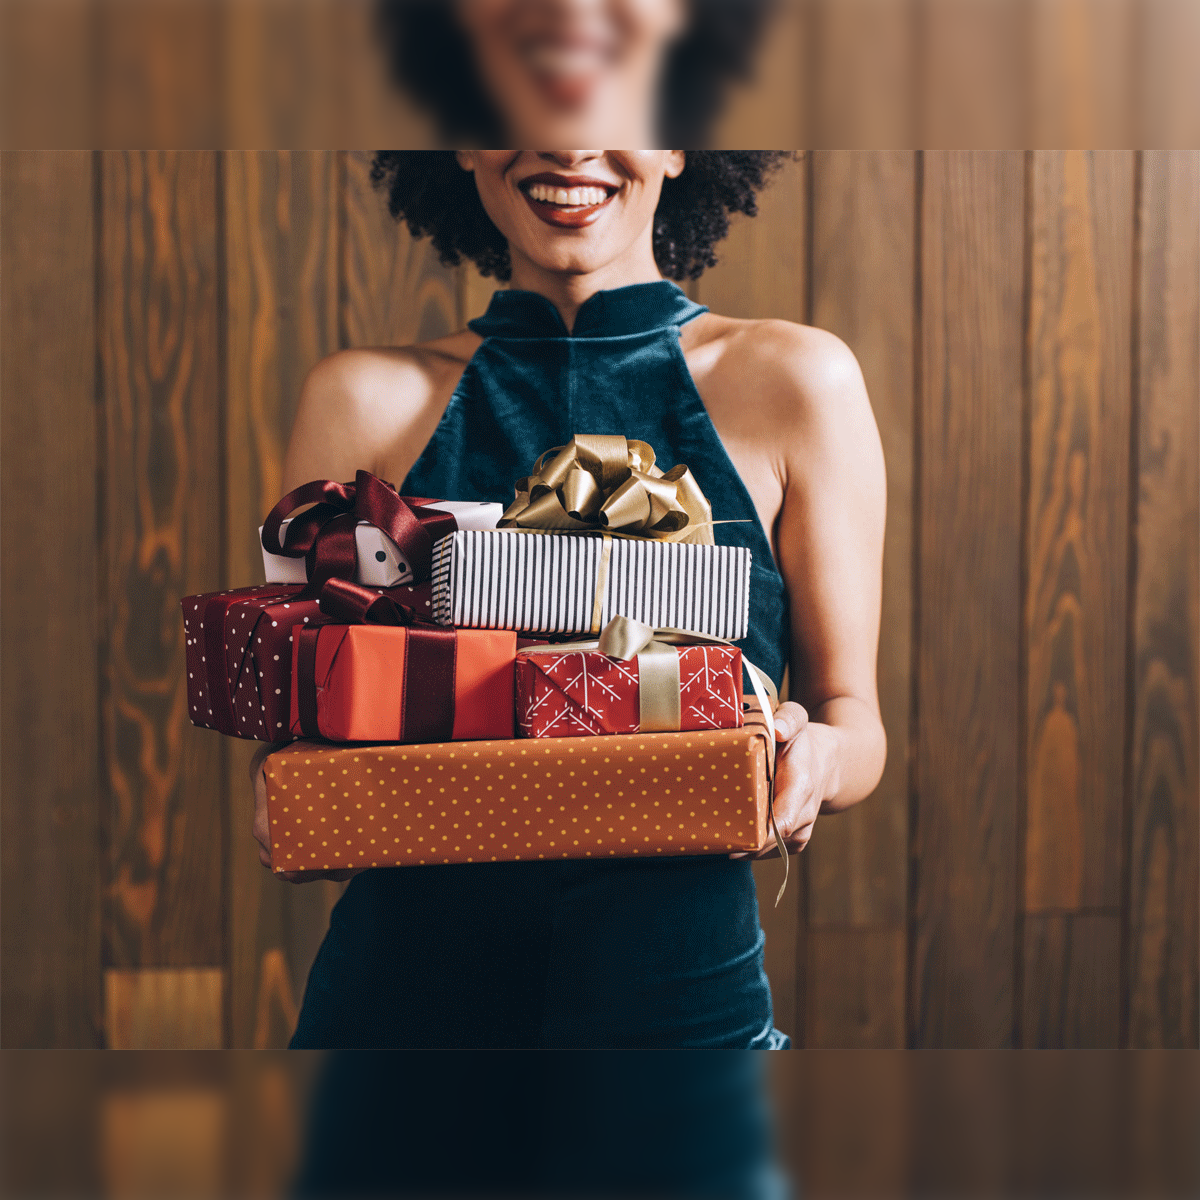 How To Send Gifts to the EU | ParcelBroker